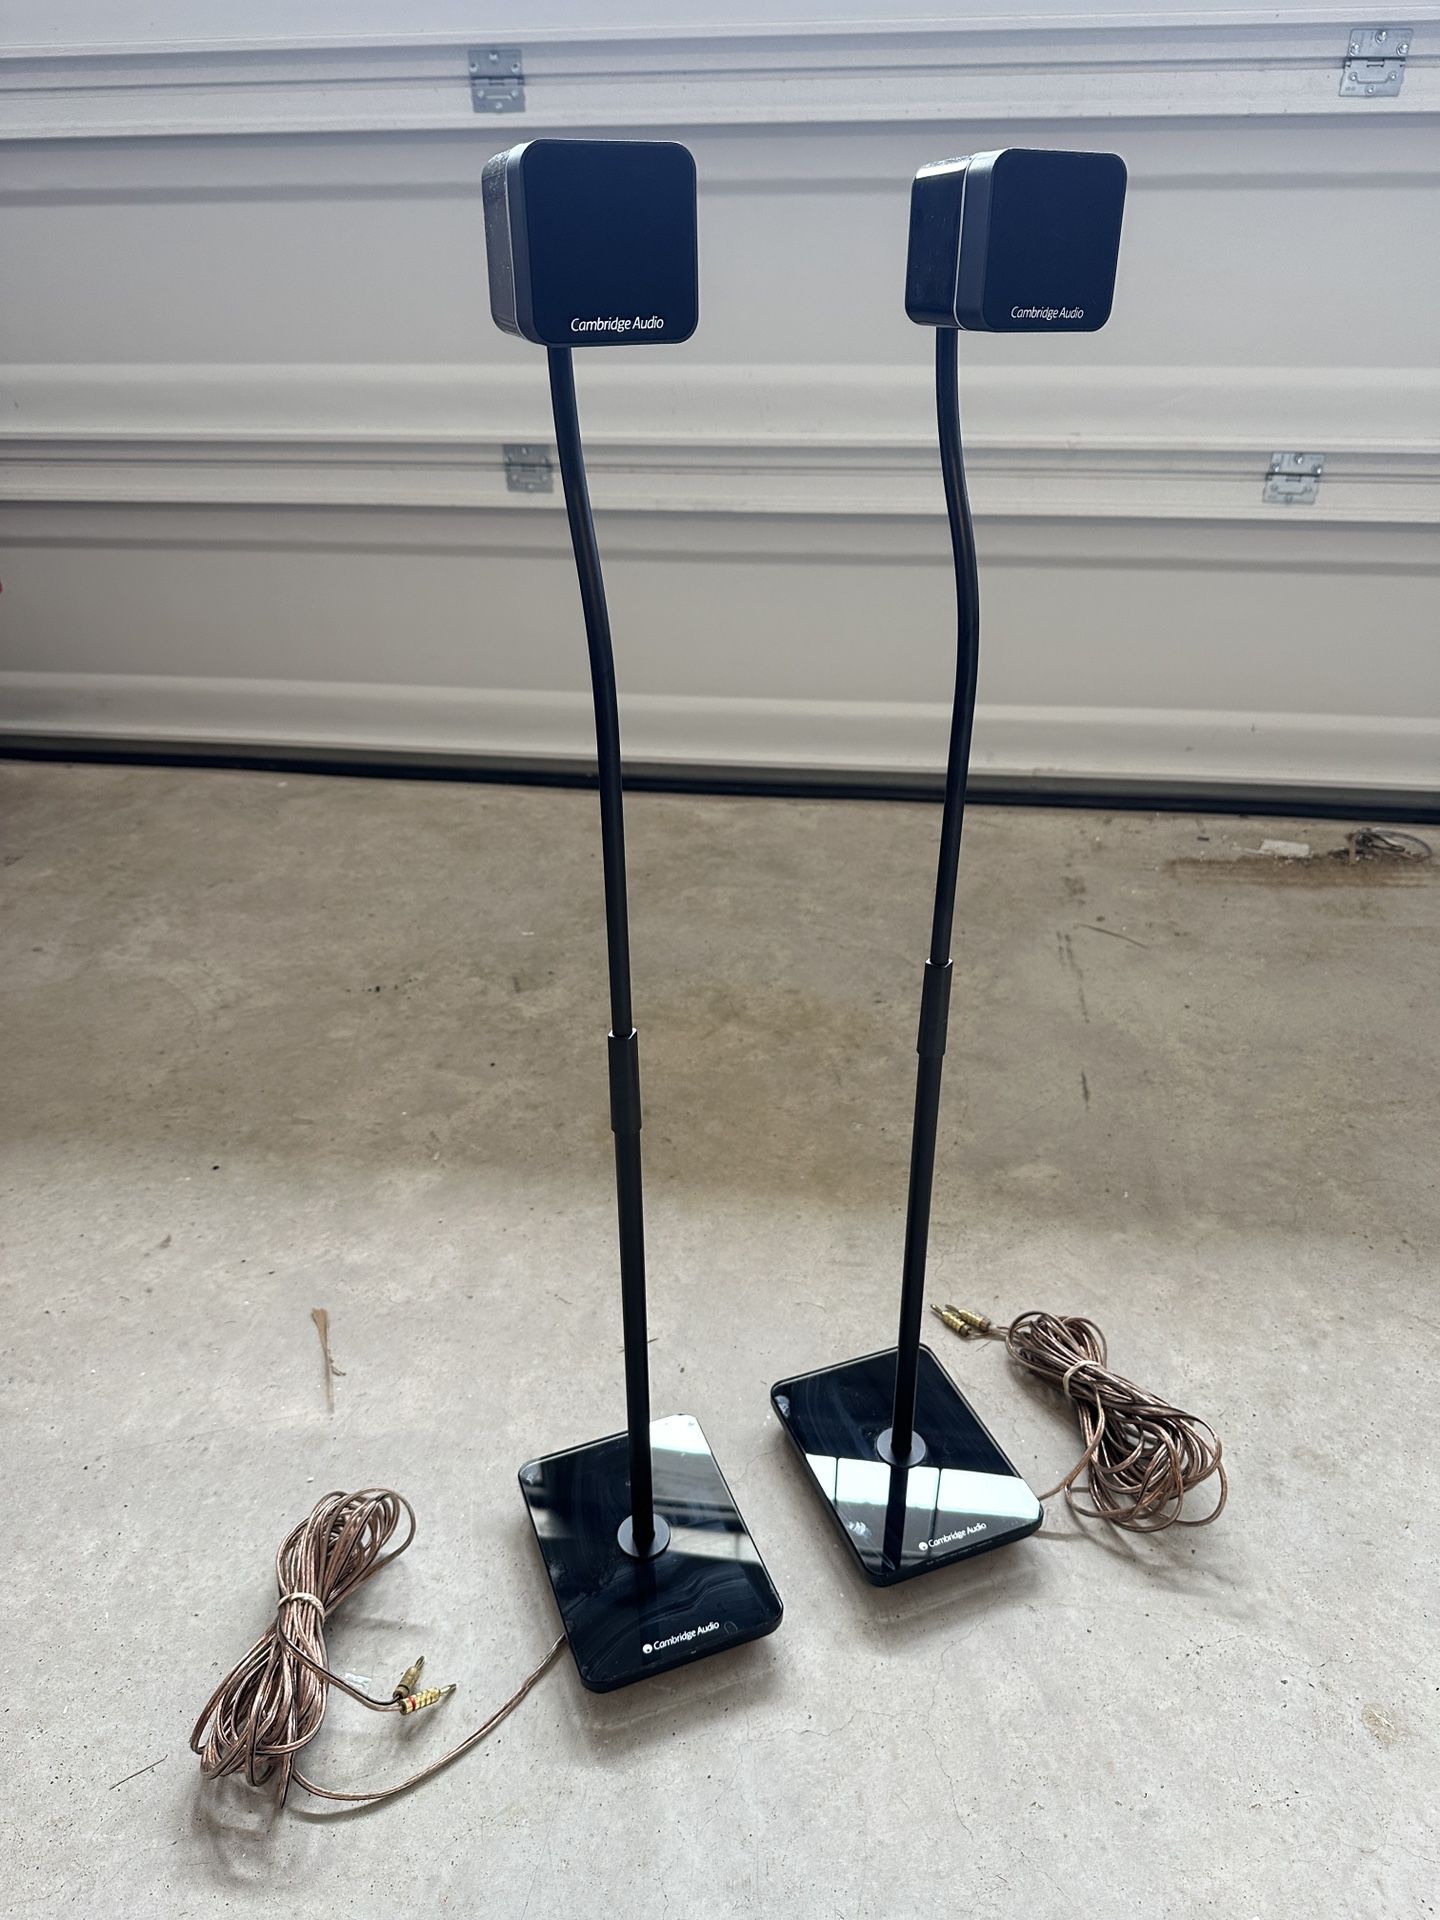 2x Cambridge Audio Rear Home Theatre Speakers With Stands